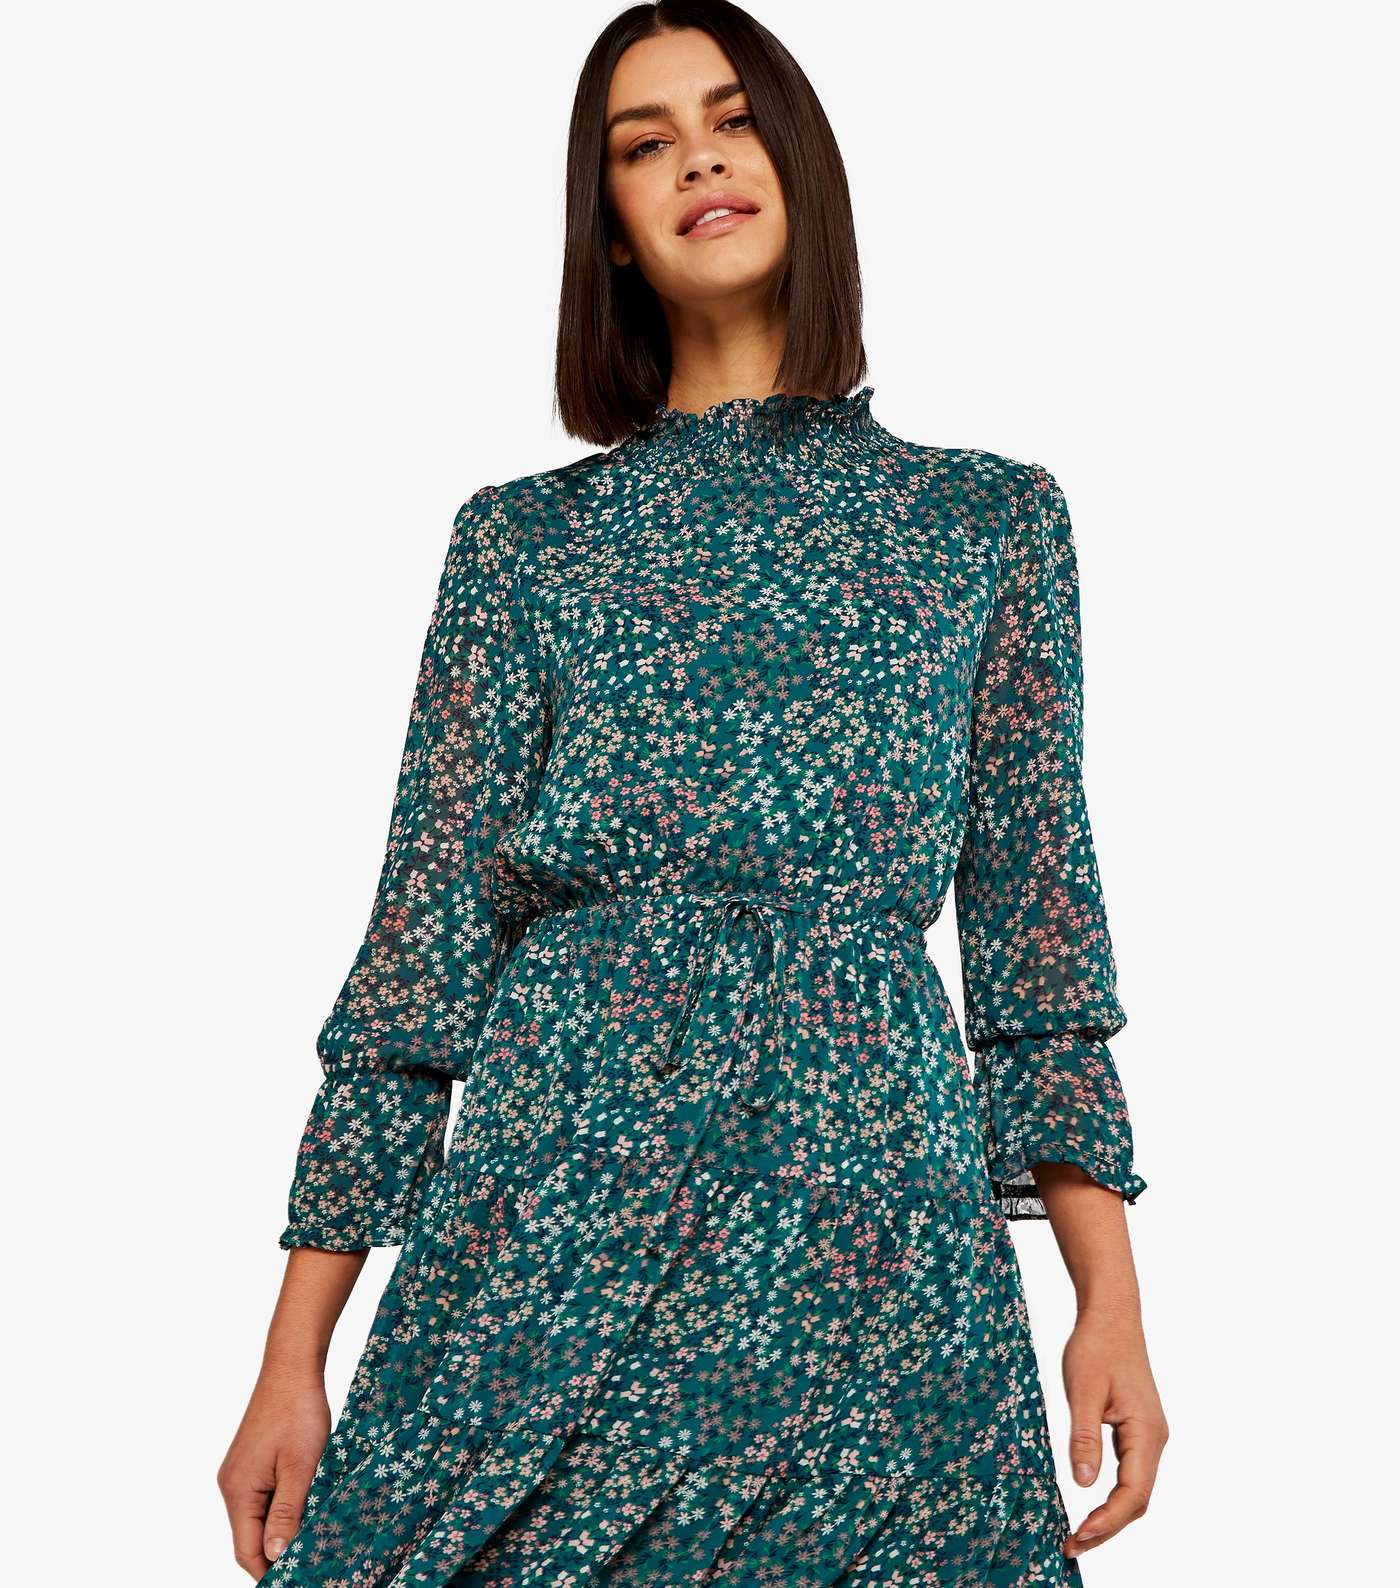 Apricot Green Floral High Neck Dress Image 3